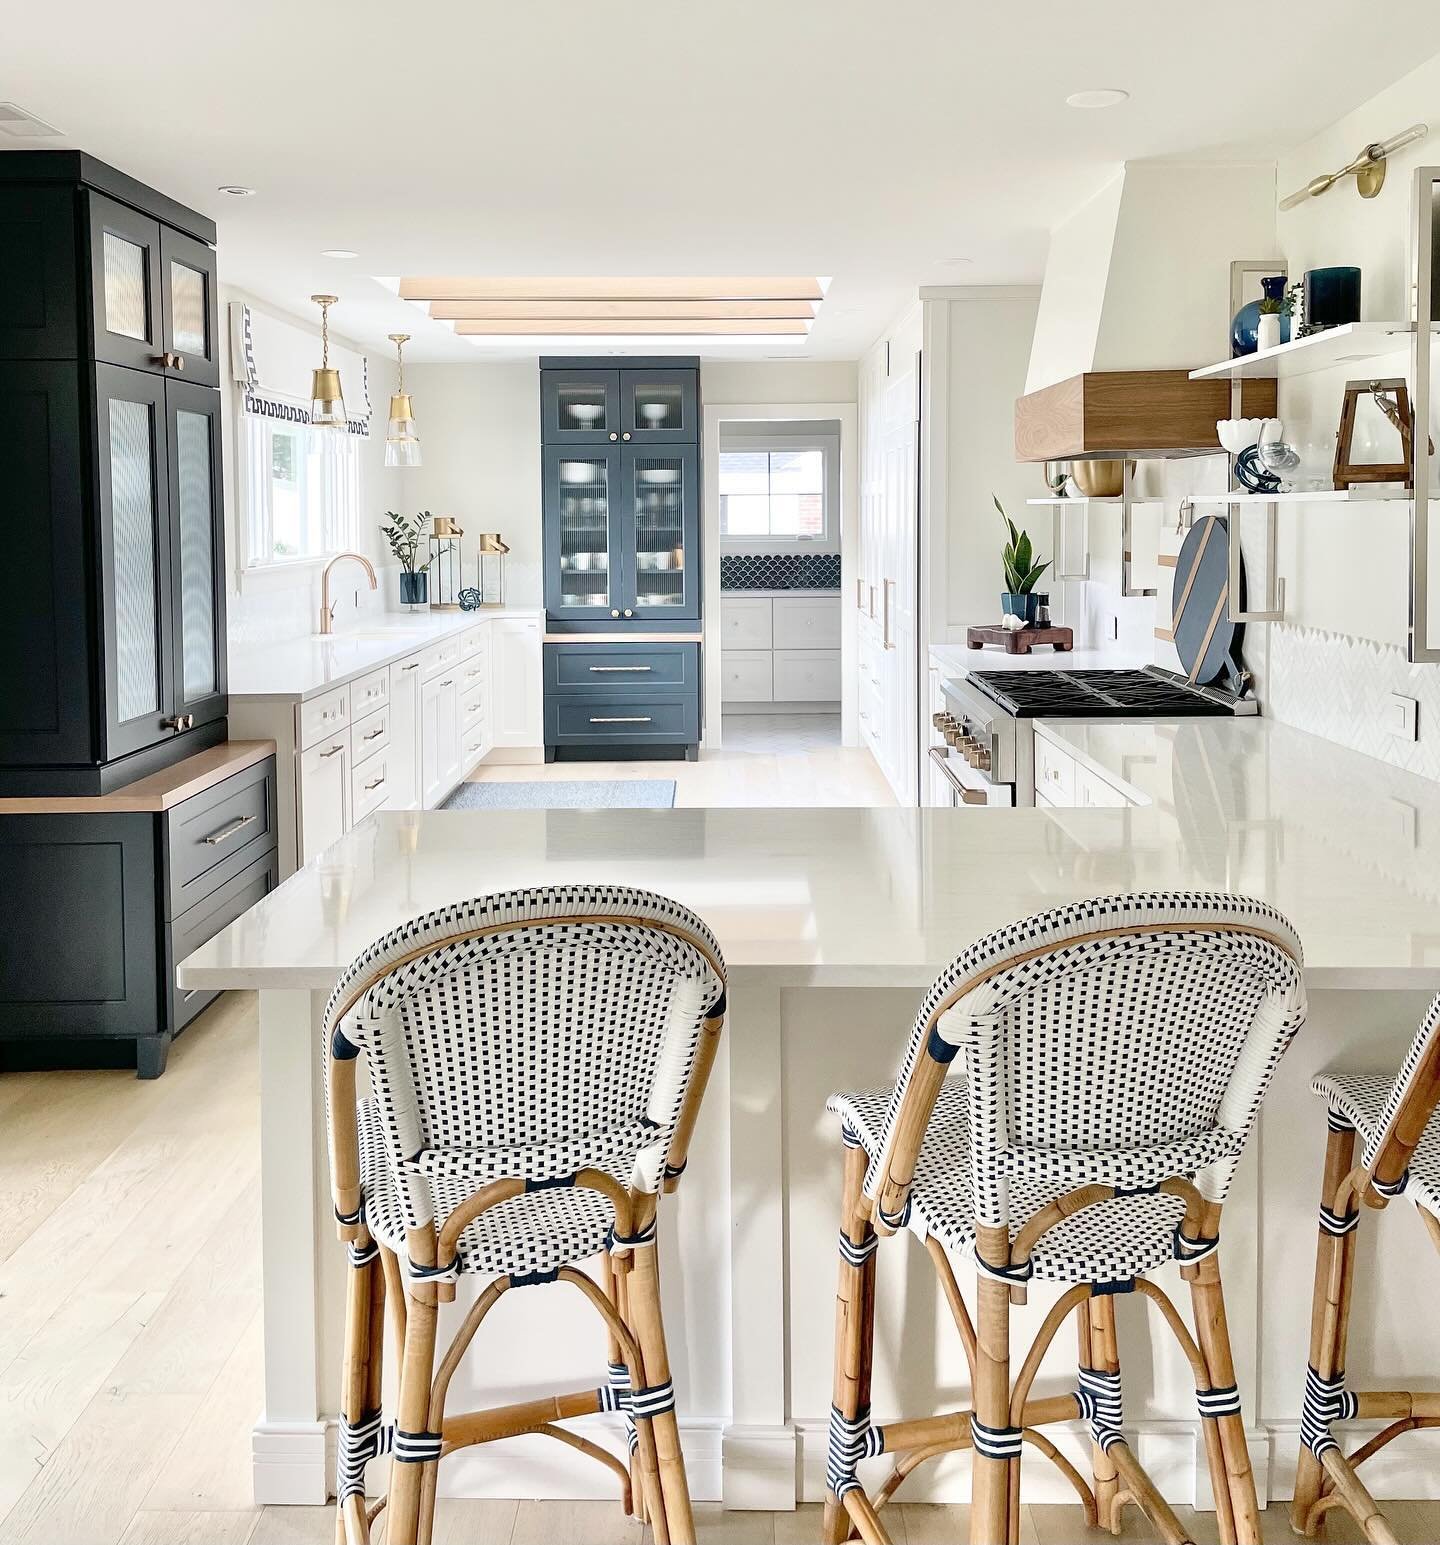 &mdash;&mdash;&mdash;&gt; Scroll to see the original kitchen
Just a few thoughts here &hellip; thankful for the kitchen layout we created, thankful for no wall cabinets/uppers, thankful I went with the navy hutches (I almost didn&rsquo;t go navy!) an